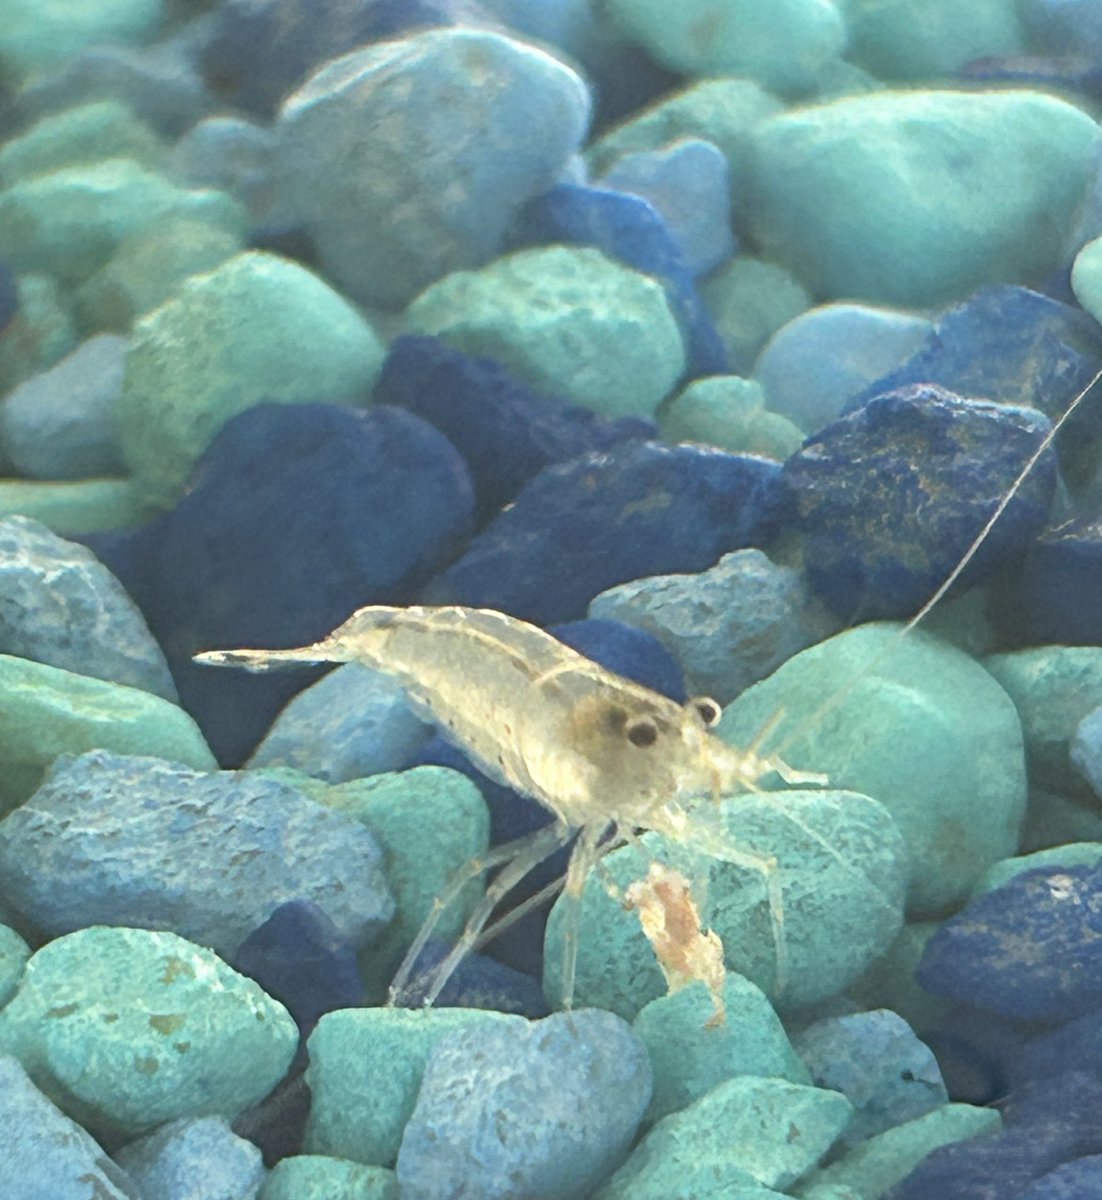 Happy Friday!

Enjoy this picture of my freshwater shrimp having an afternoon snack.